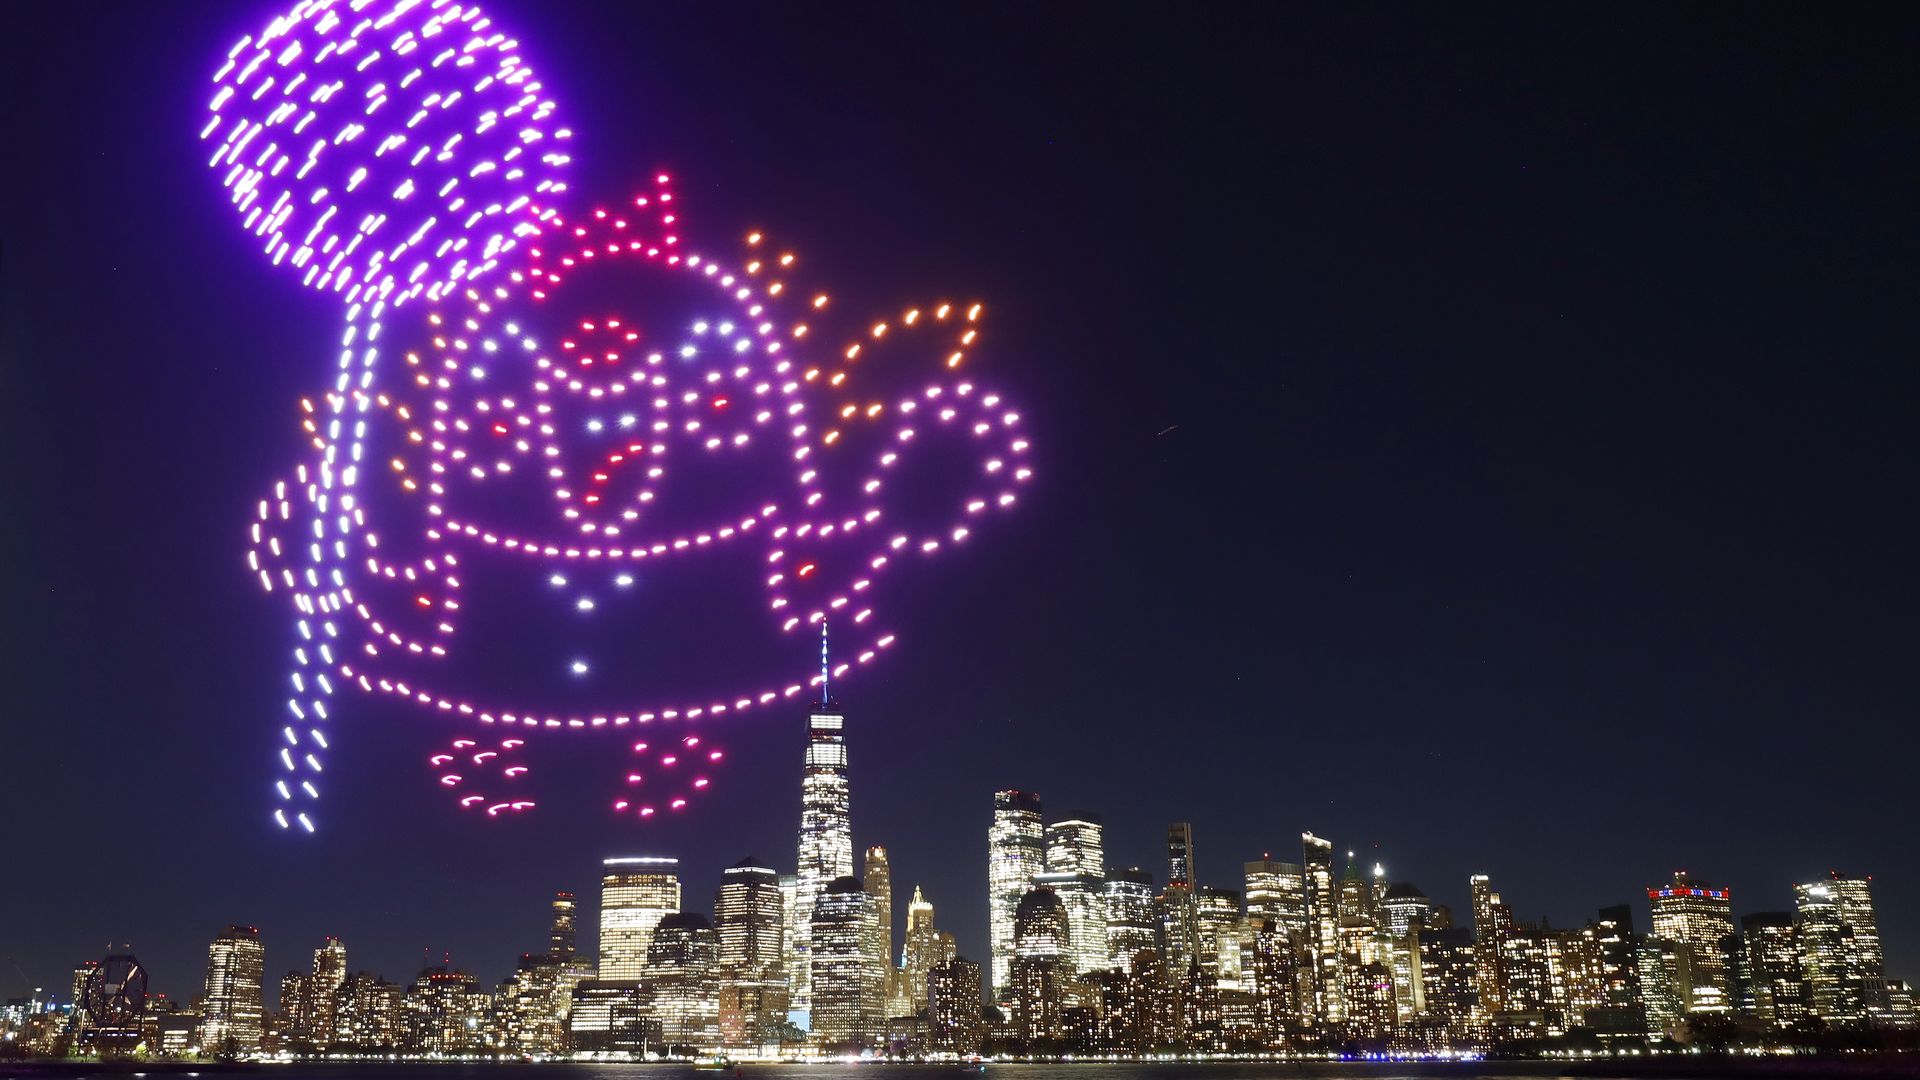 A character holding a lollipop is created by 500 drones over the skyline of lower Manhattan and One World Trade Center.